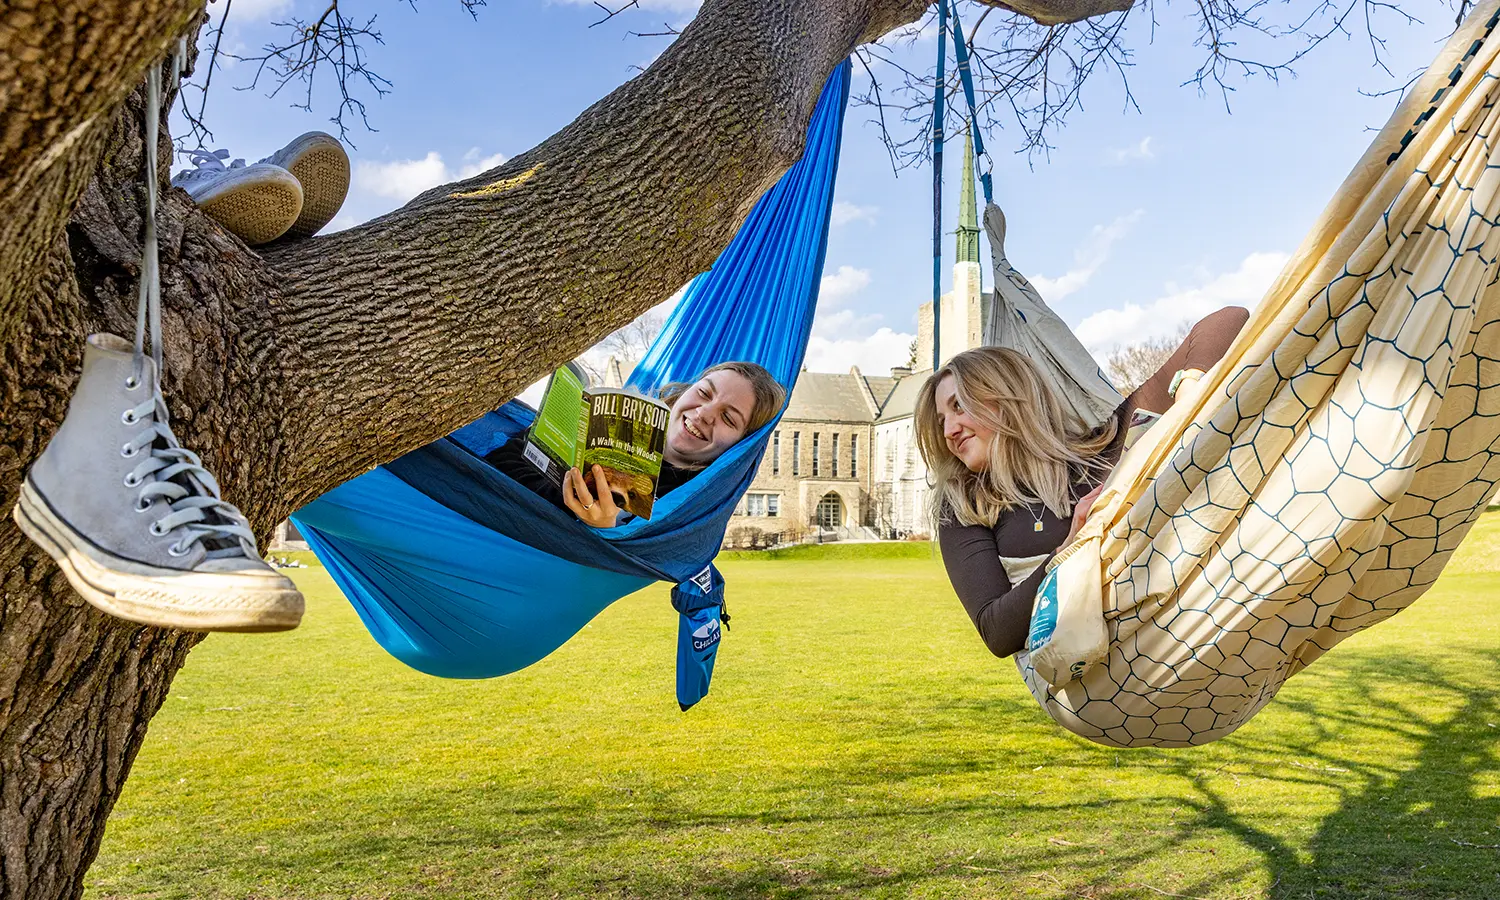 In This Week in Photos, we reflect on the Senior Year for the Class of 2024. Here, Annette Stephens ’24 and Hannah Mattey ’24 relax in hammocks on the Quad.